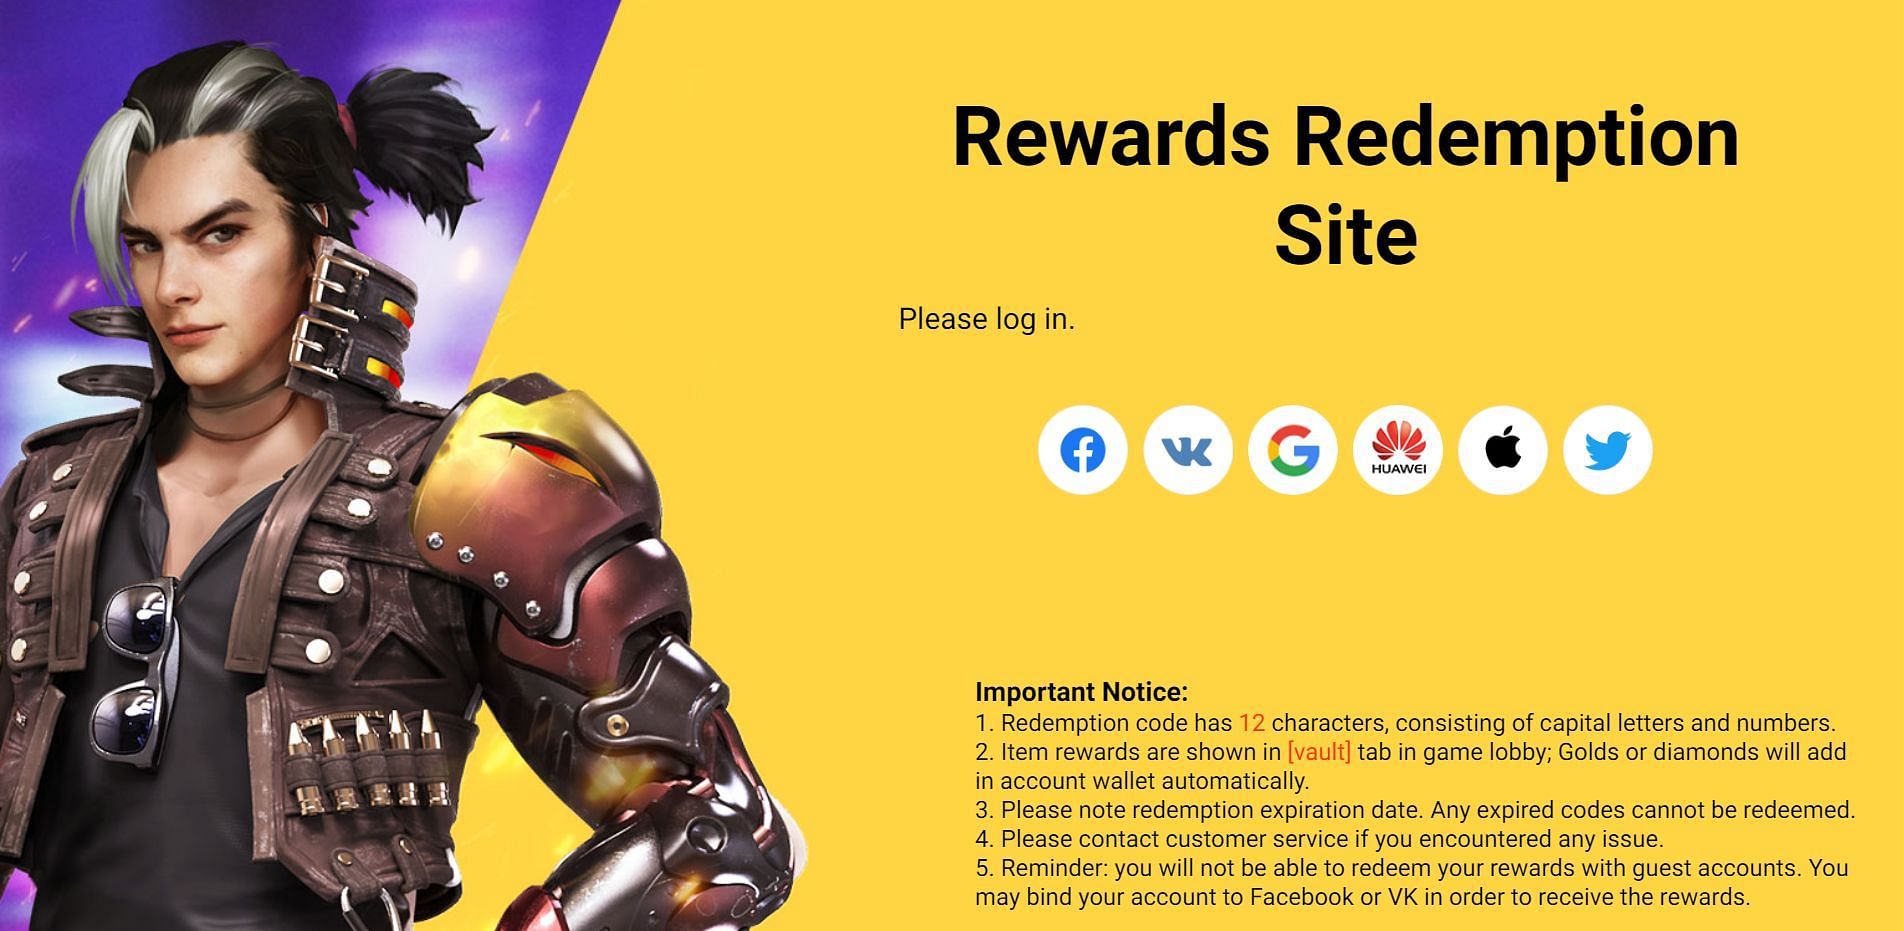 Sign in to collect the rewards (Image via Free Fire)